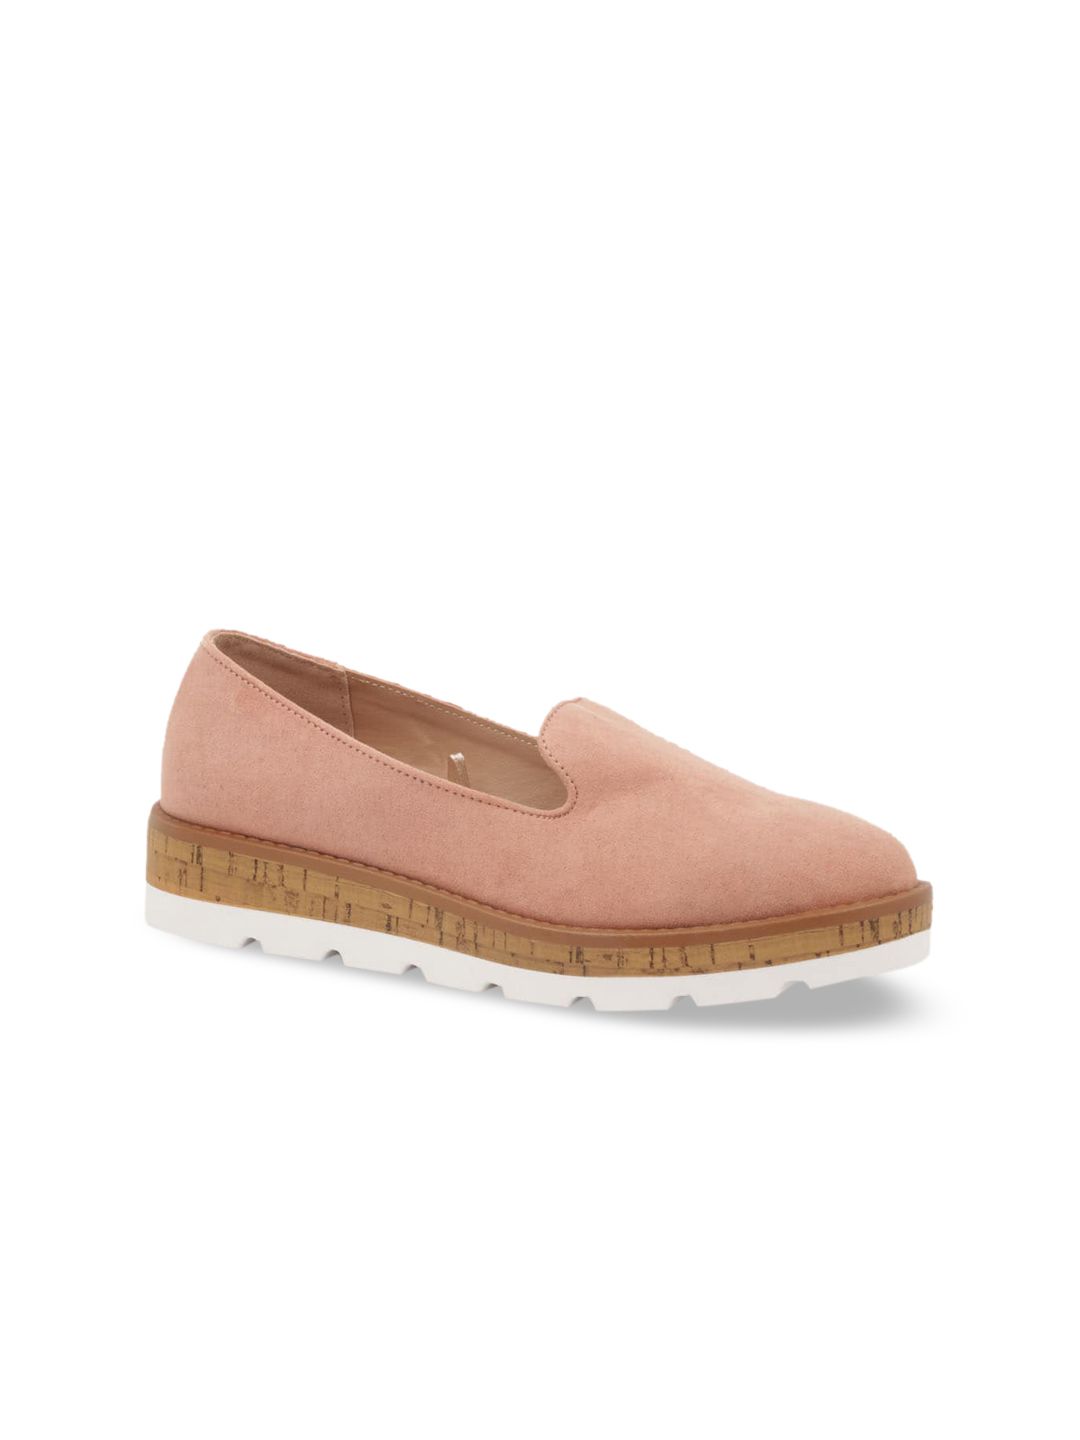 London Rag Women Pink Suede Loafers Price in India